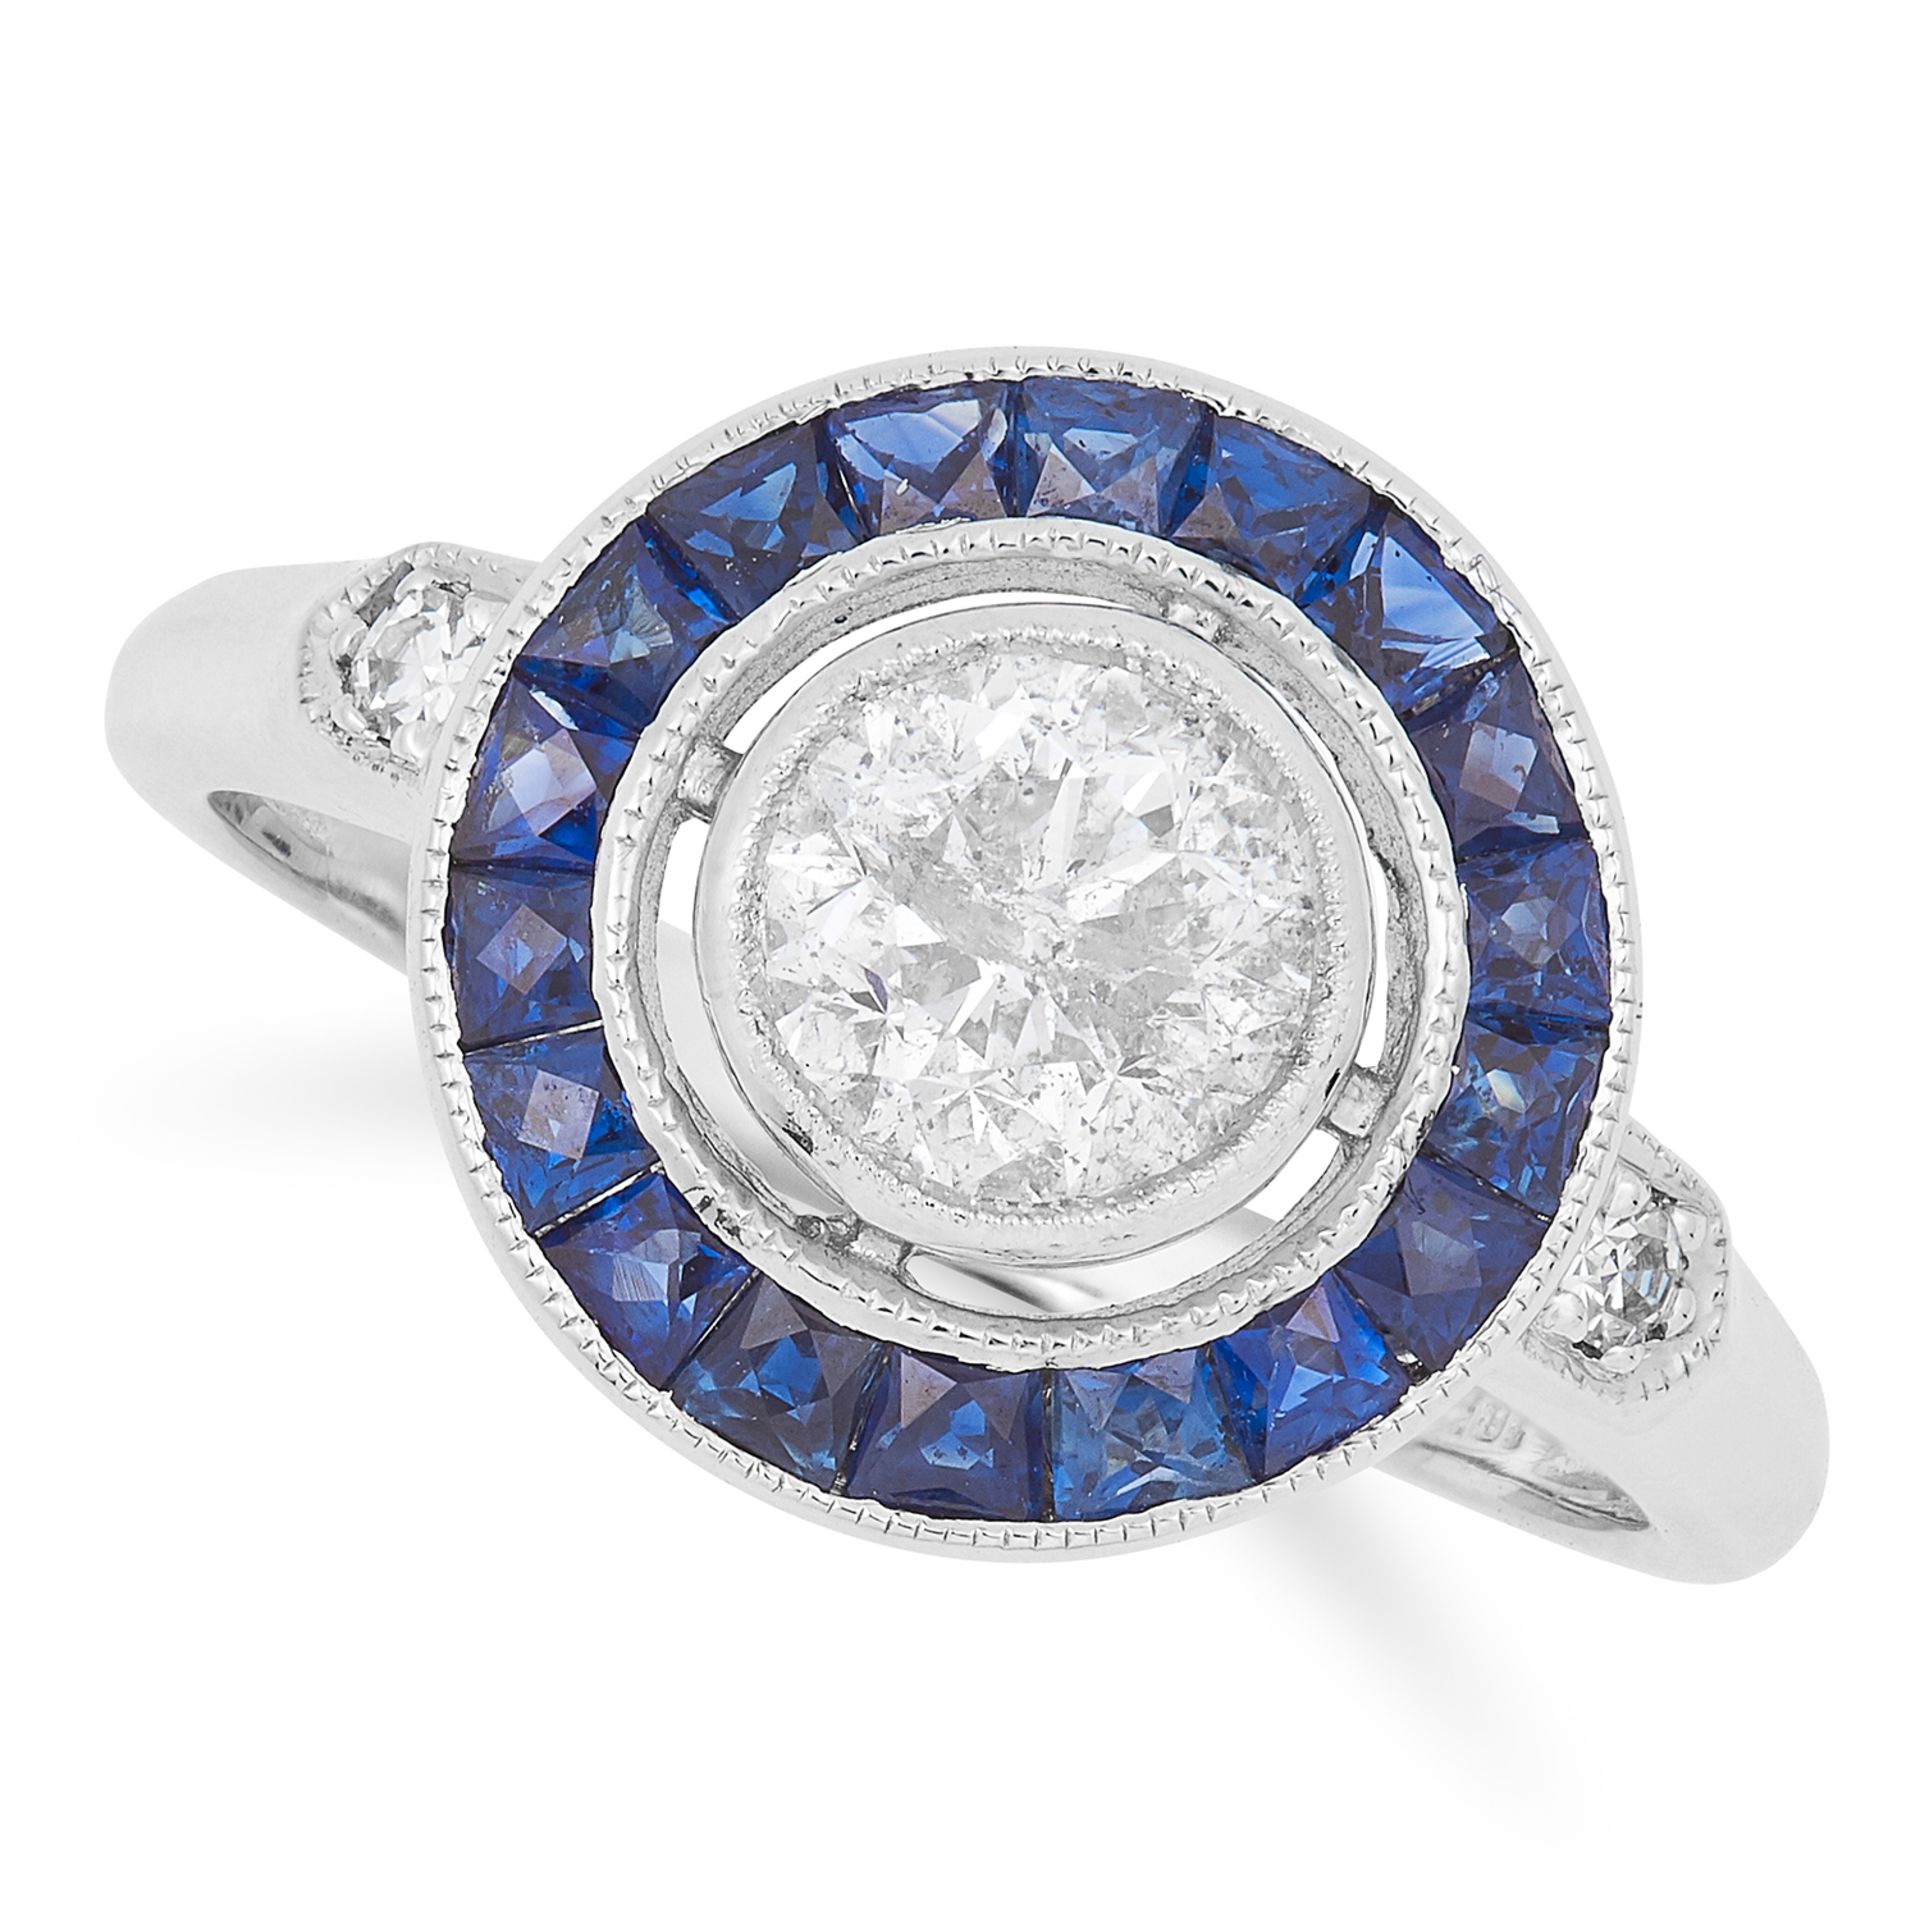 0.86 CARAT DIAMOND AND SAPPHIRE TARGET RING set with a round cut diamond of approximately 0.86